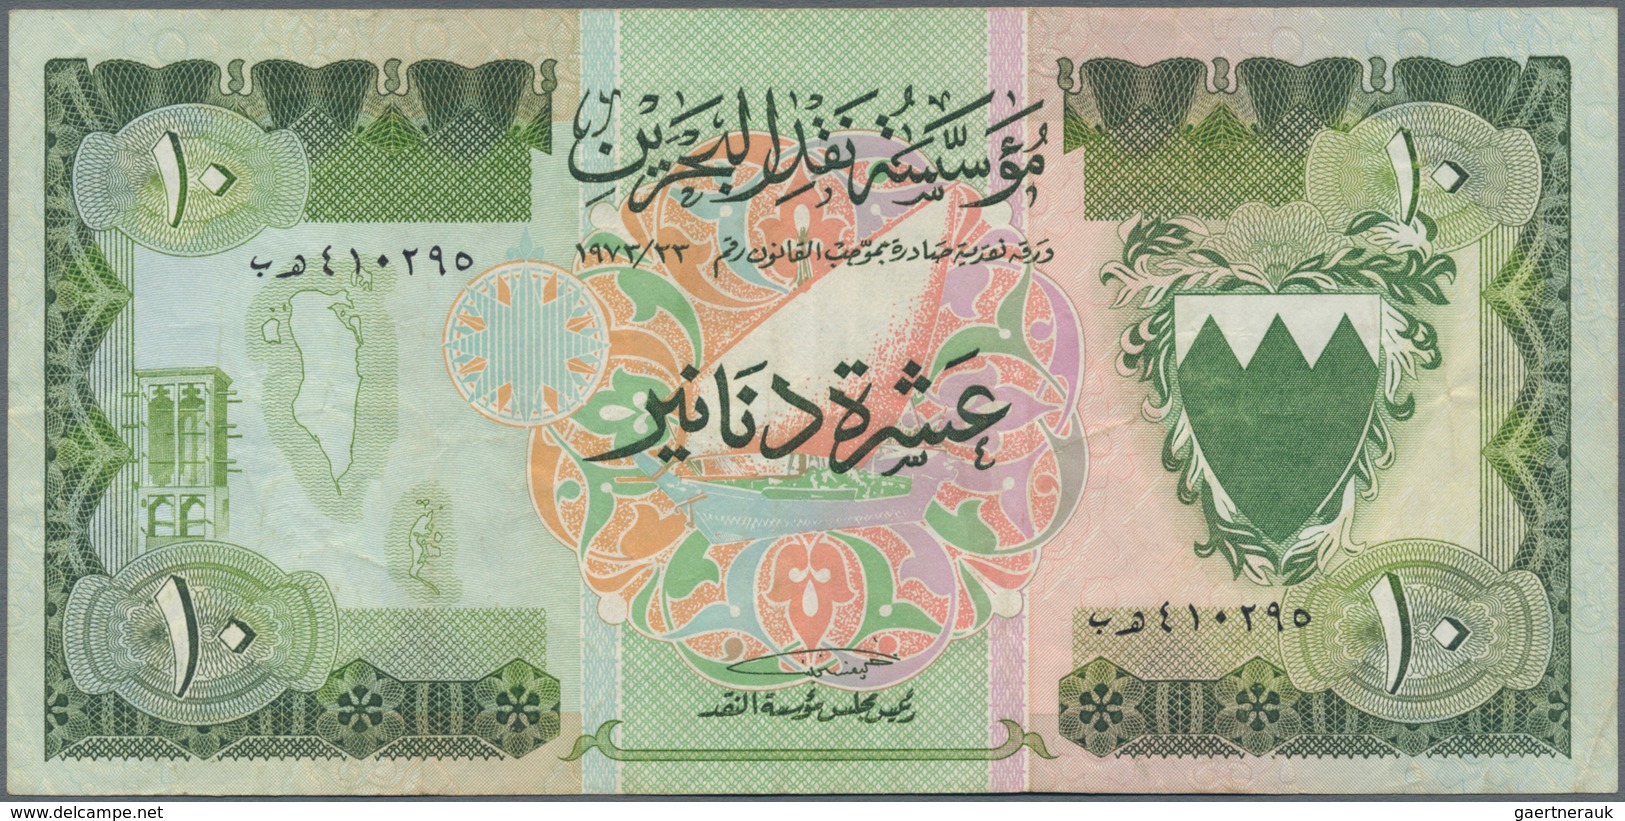 Bahrain: 10 Dinars L.1973, P.9, Still Strong Paper And Bright Colors With Several Folds And Creases. - Bahrain